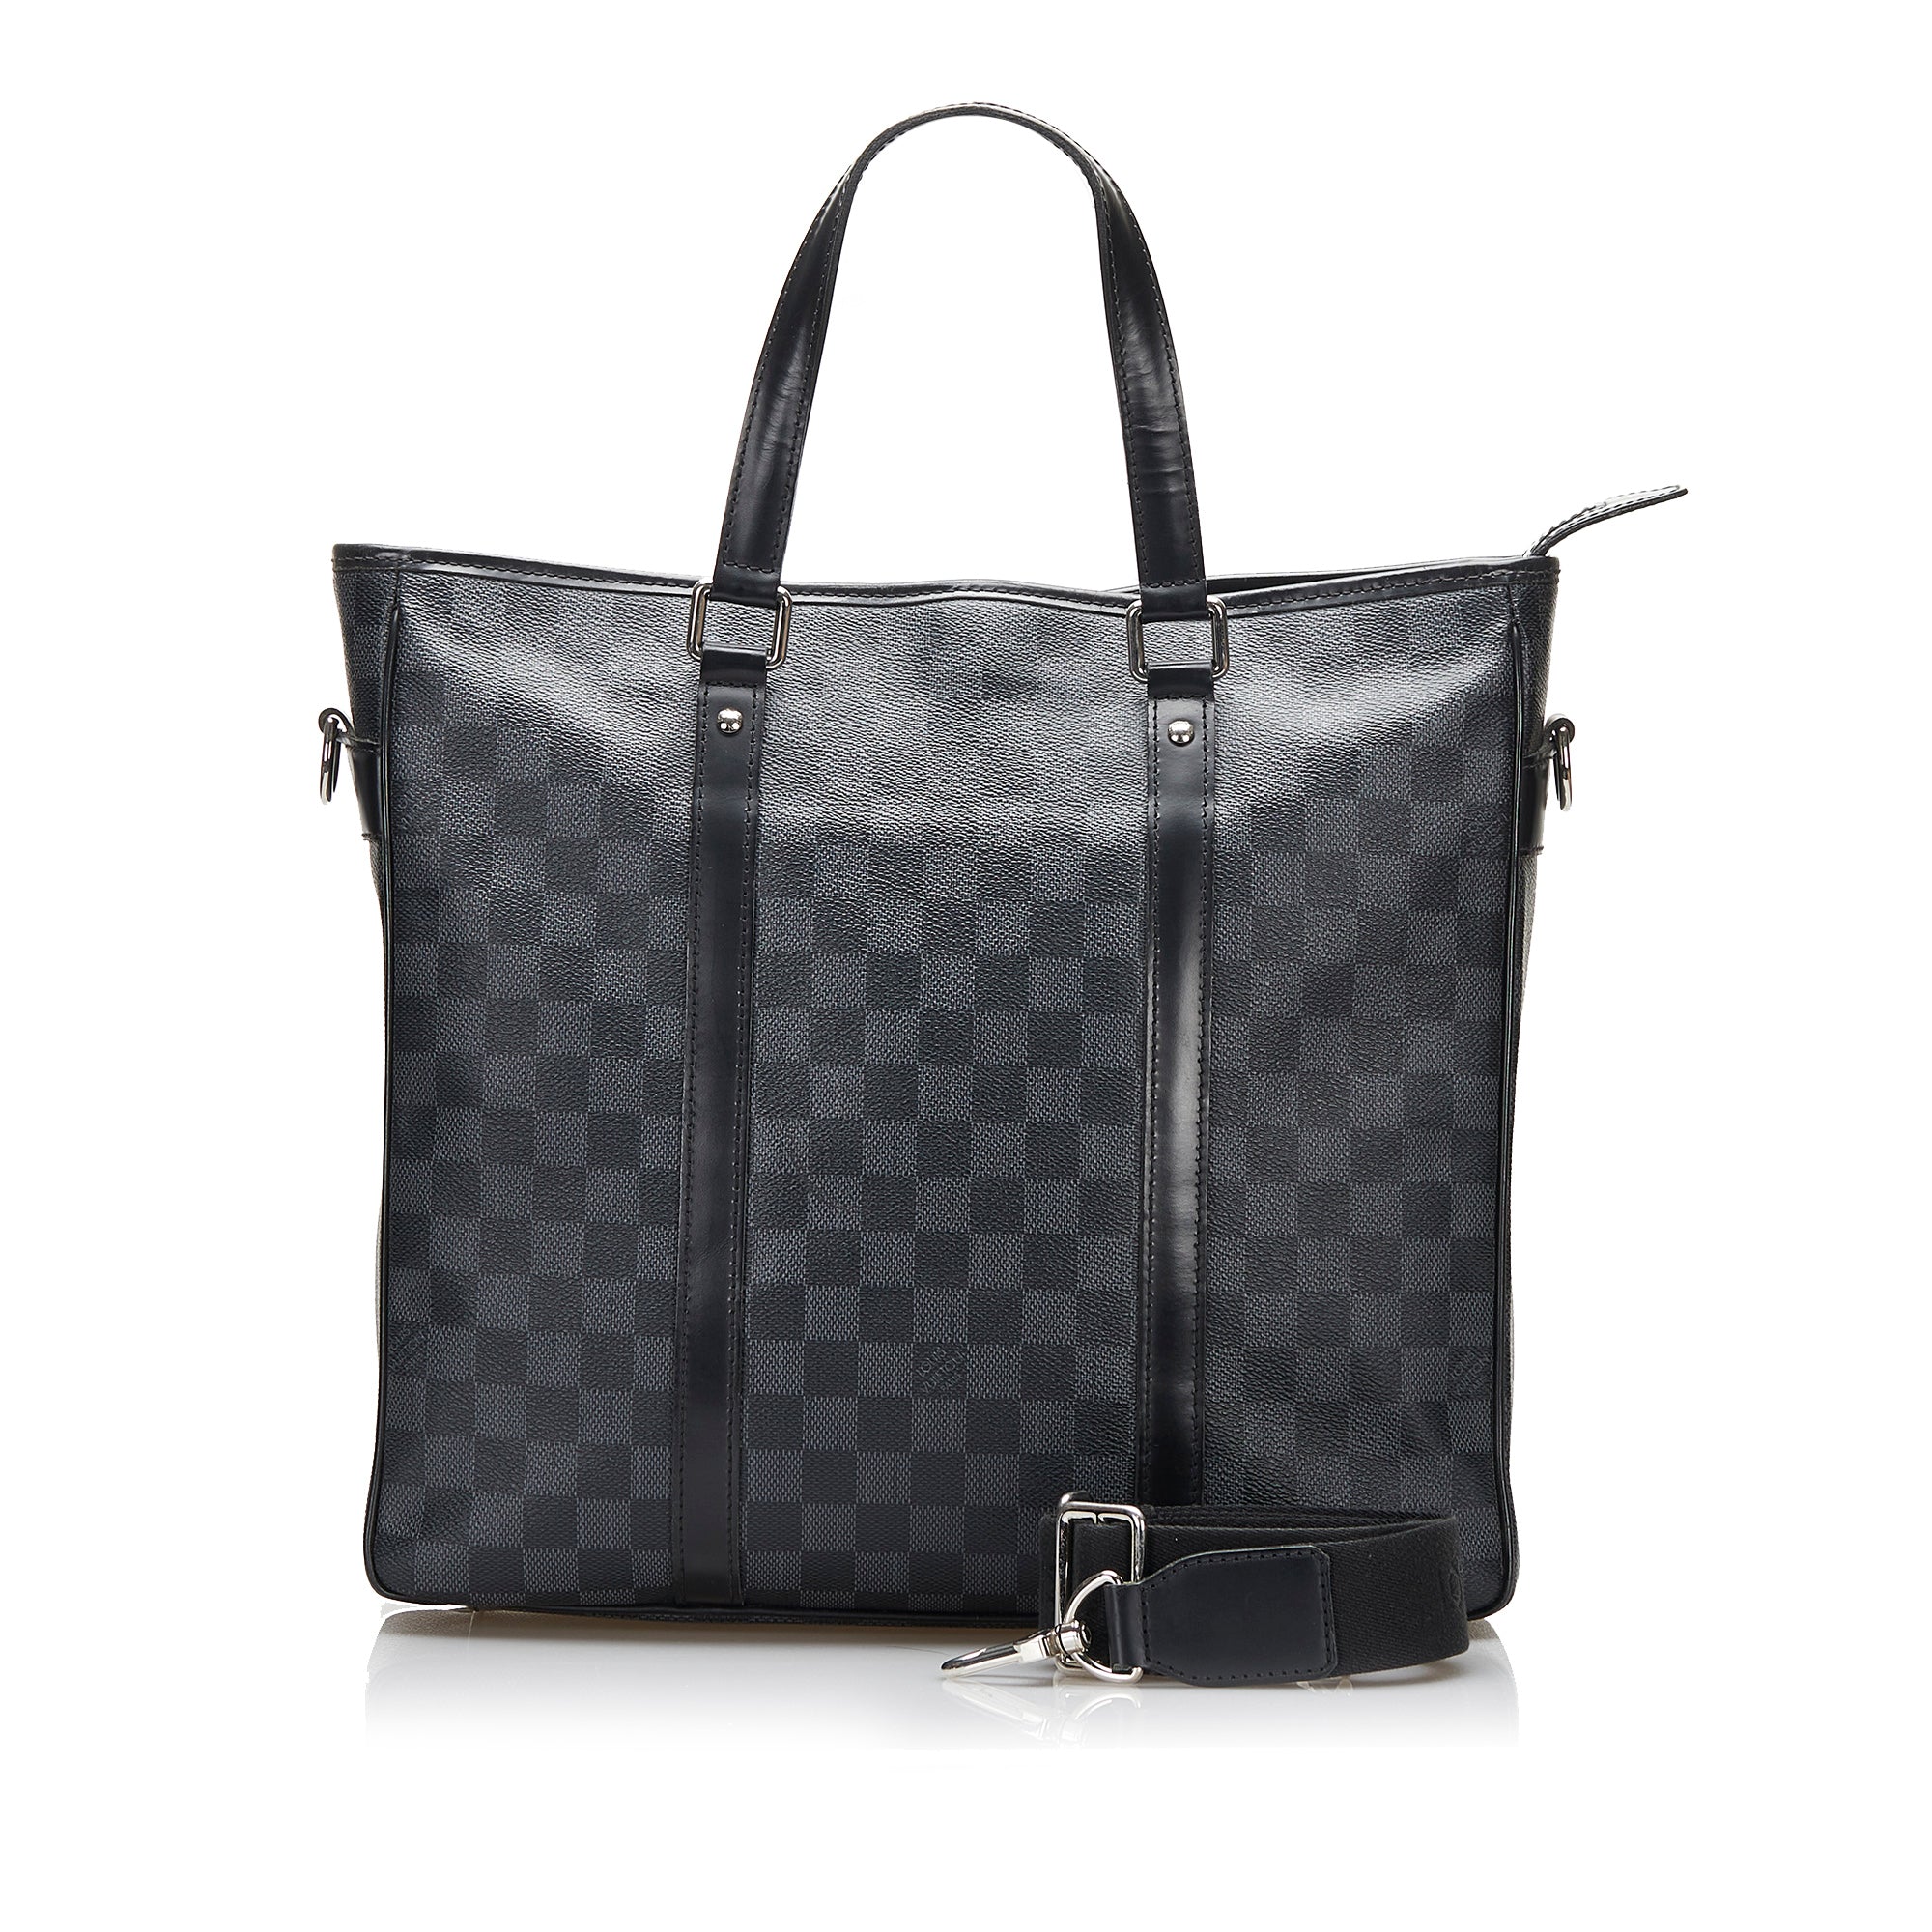 Pre-Owned Louis Vuitton Tadao PM Bag 213057/1